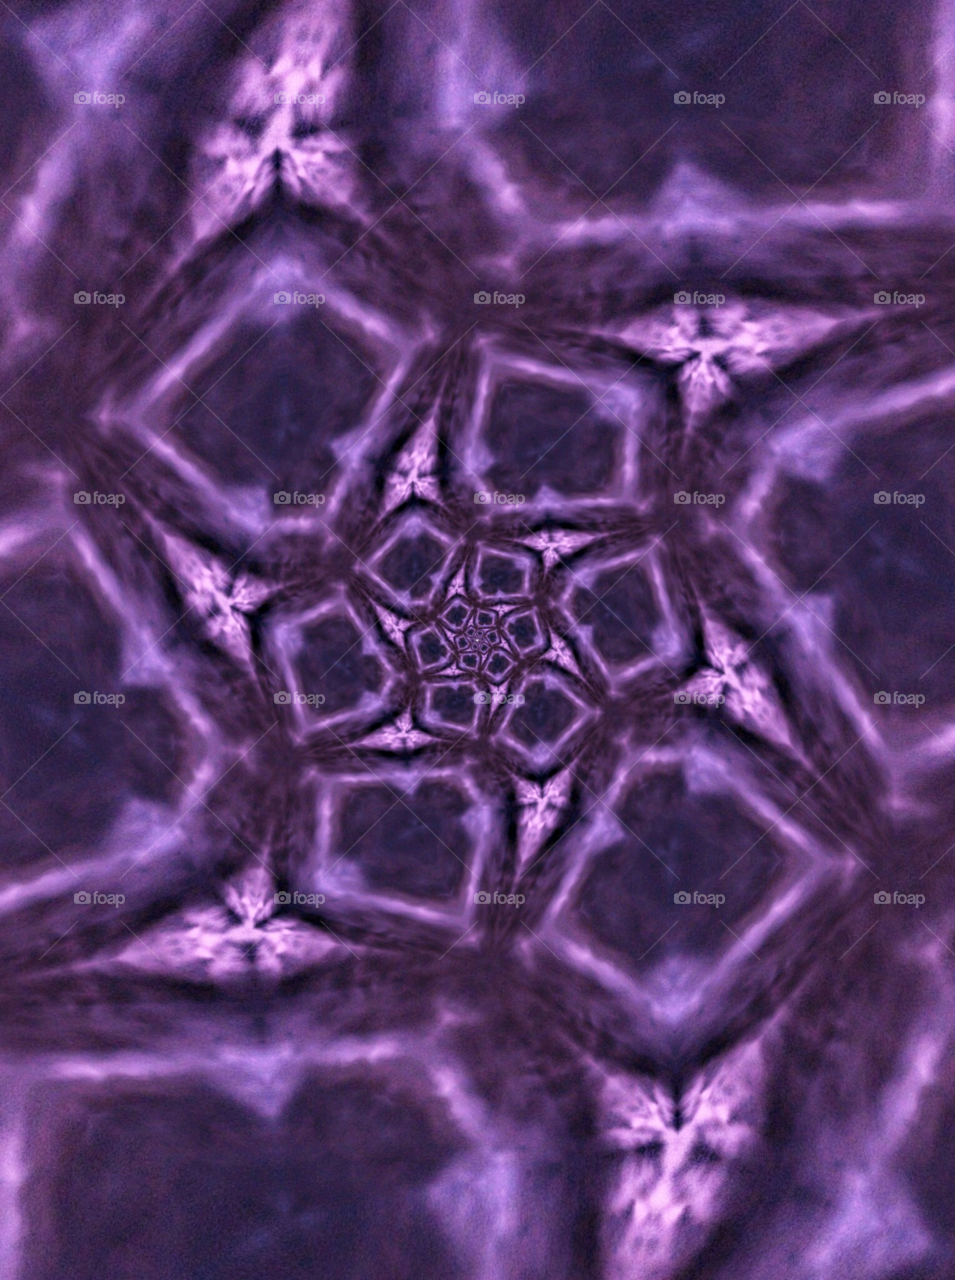 Spiral Fractal Kaleidoscope of purple clouds produced by lightning.